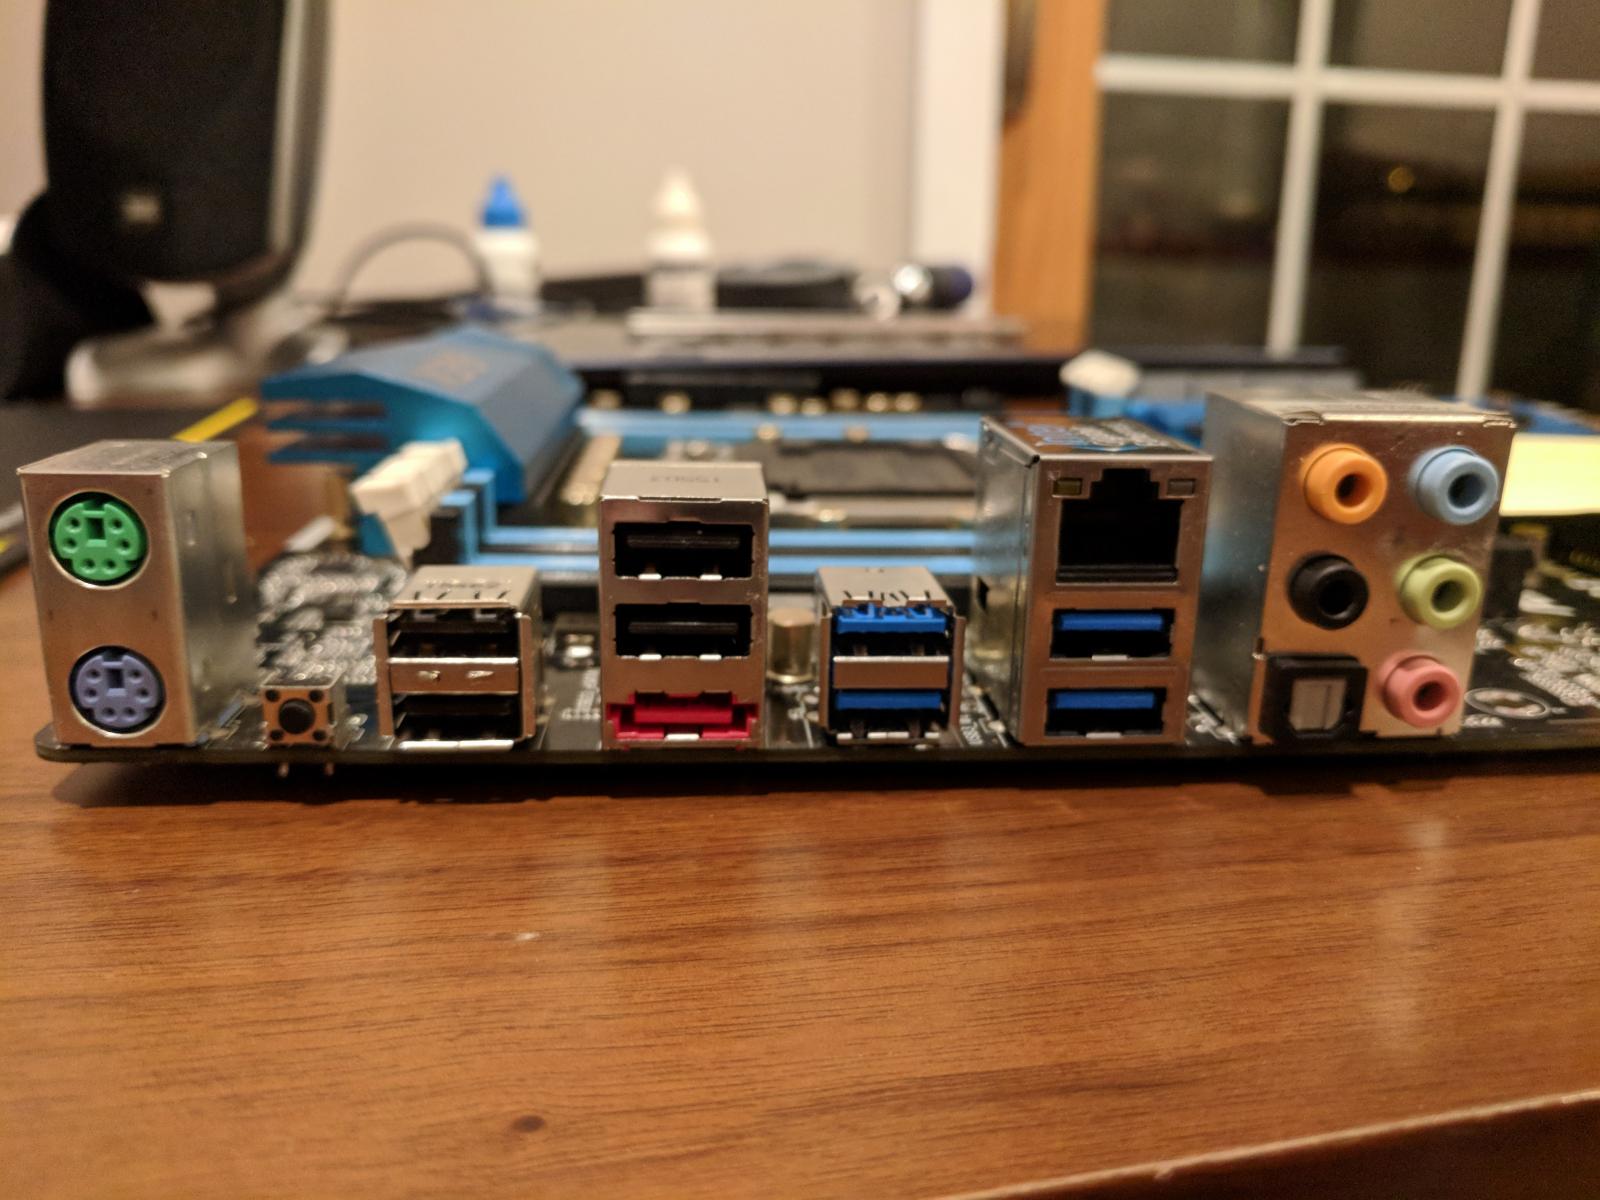 For sale ASRock x99 Extreme4